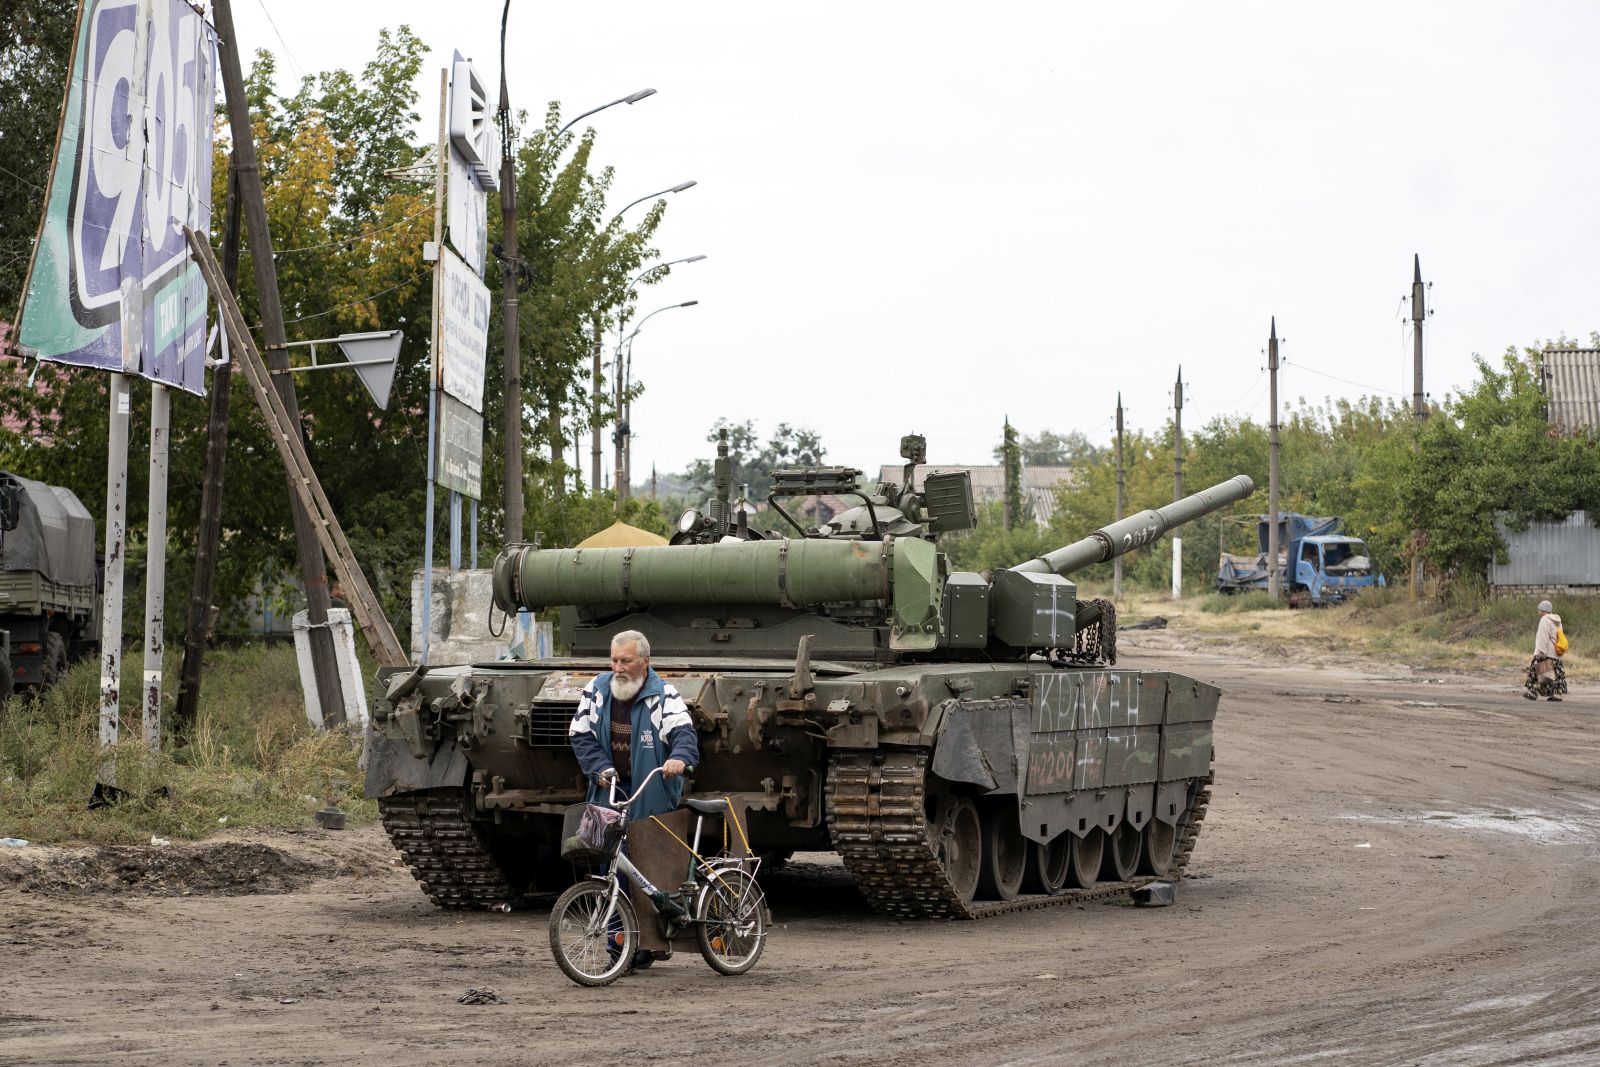 epa10186097 Local resident walks by a Ukrainian tank in the reclaimed city of Izyum, Ukraine, 15 September 2022. The Ukrainian army pushed Russian troops from occupied territory in the northeast of the country in a counterattack. Kharkiv and surrounding areas have been the target of heavy shelling since February 2022, when Russian troops entered Ukraine starting a conflict that has provoked destruction and a humanitarian crisis.  EPA/ANASTASIA VLASOVA